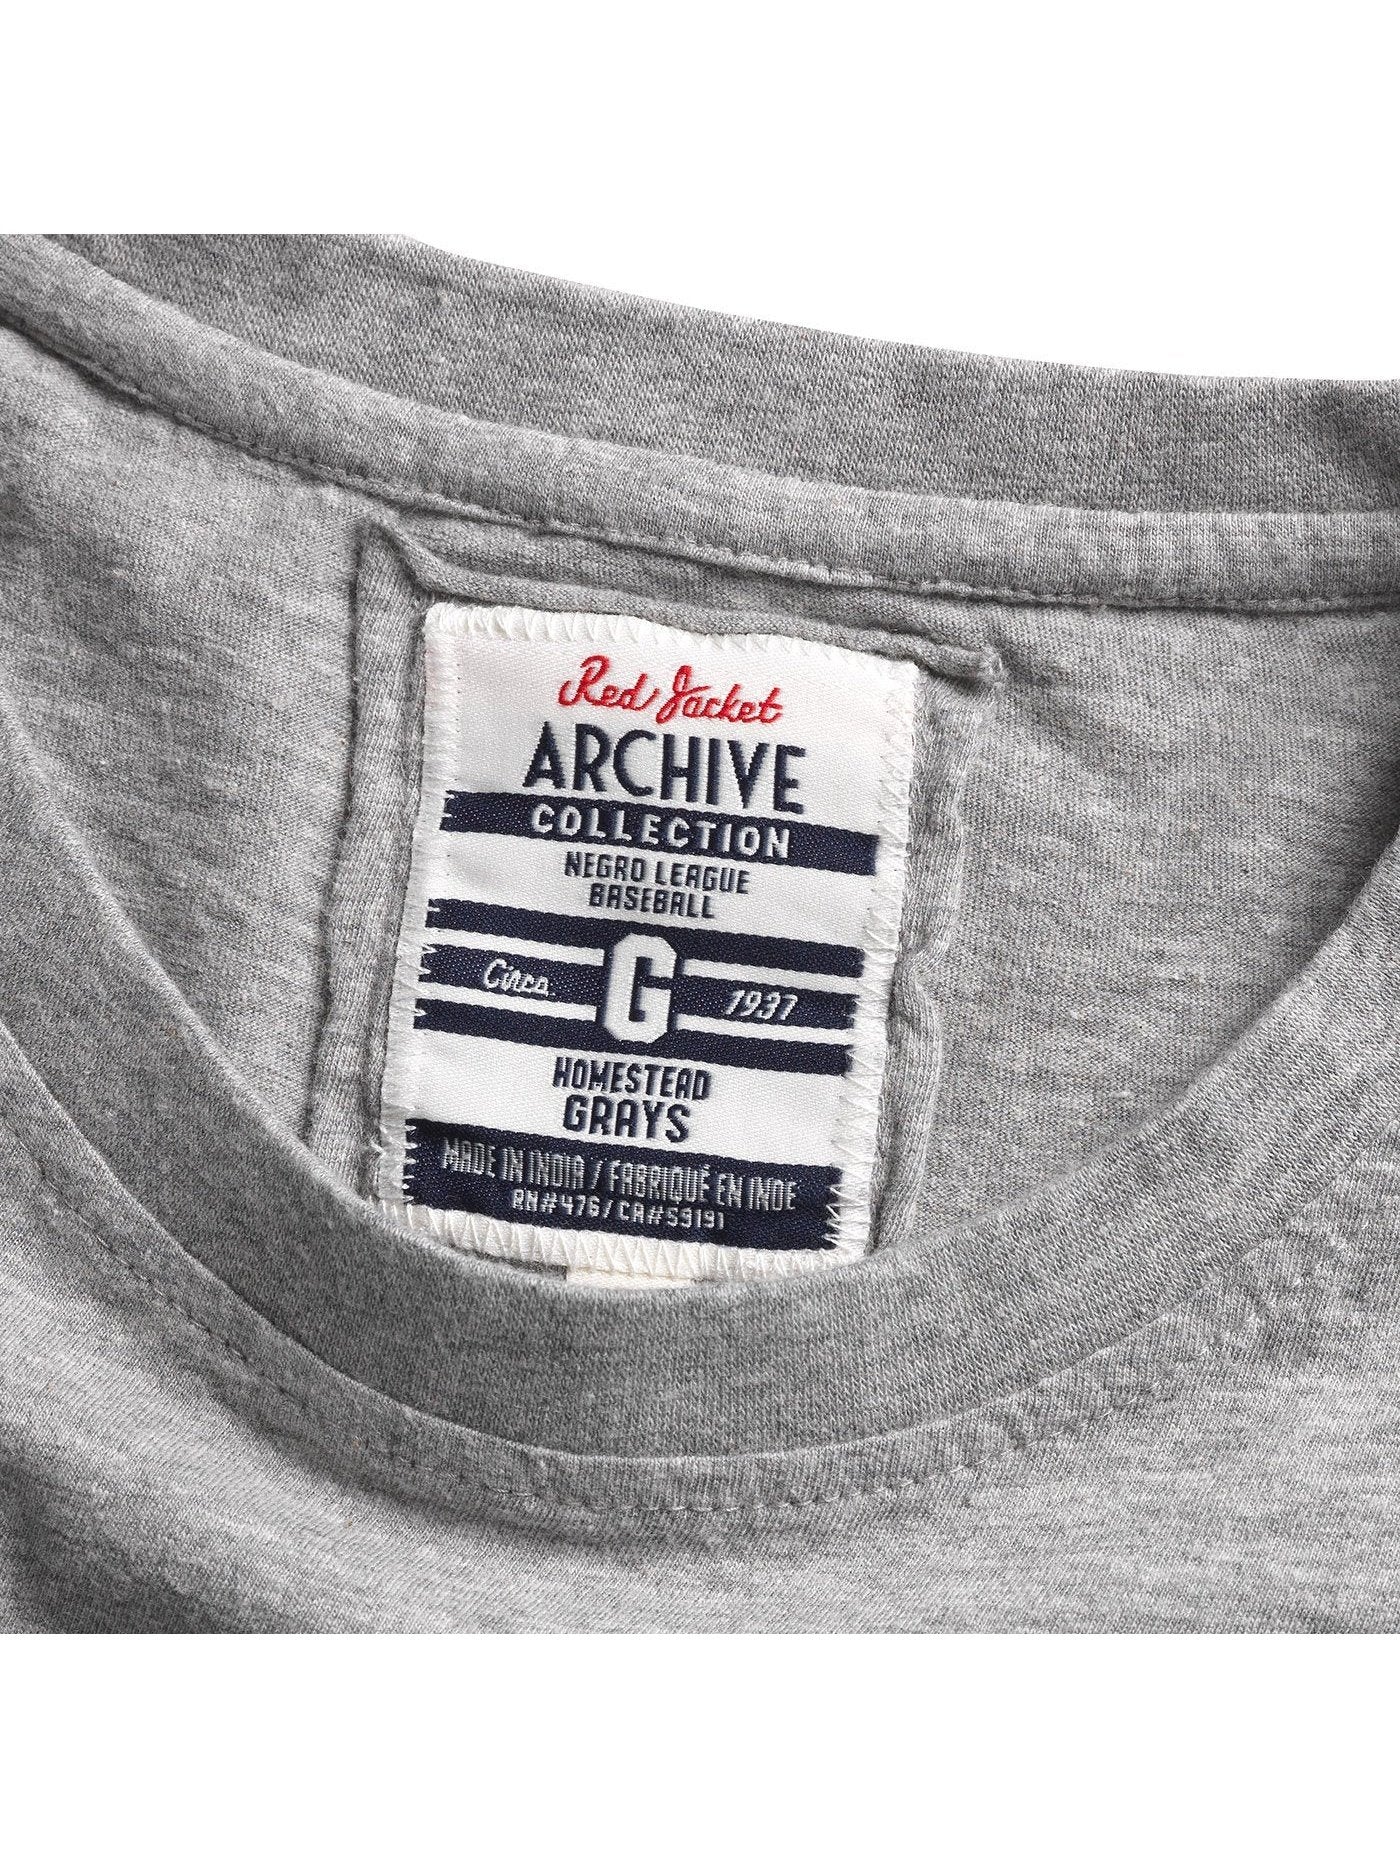 American Needle Red Jacket Mens Homestead Grays Archive BT2 T-Shirts Heather Grey RJ801A-HOG.